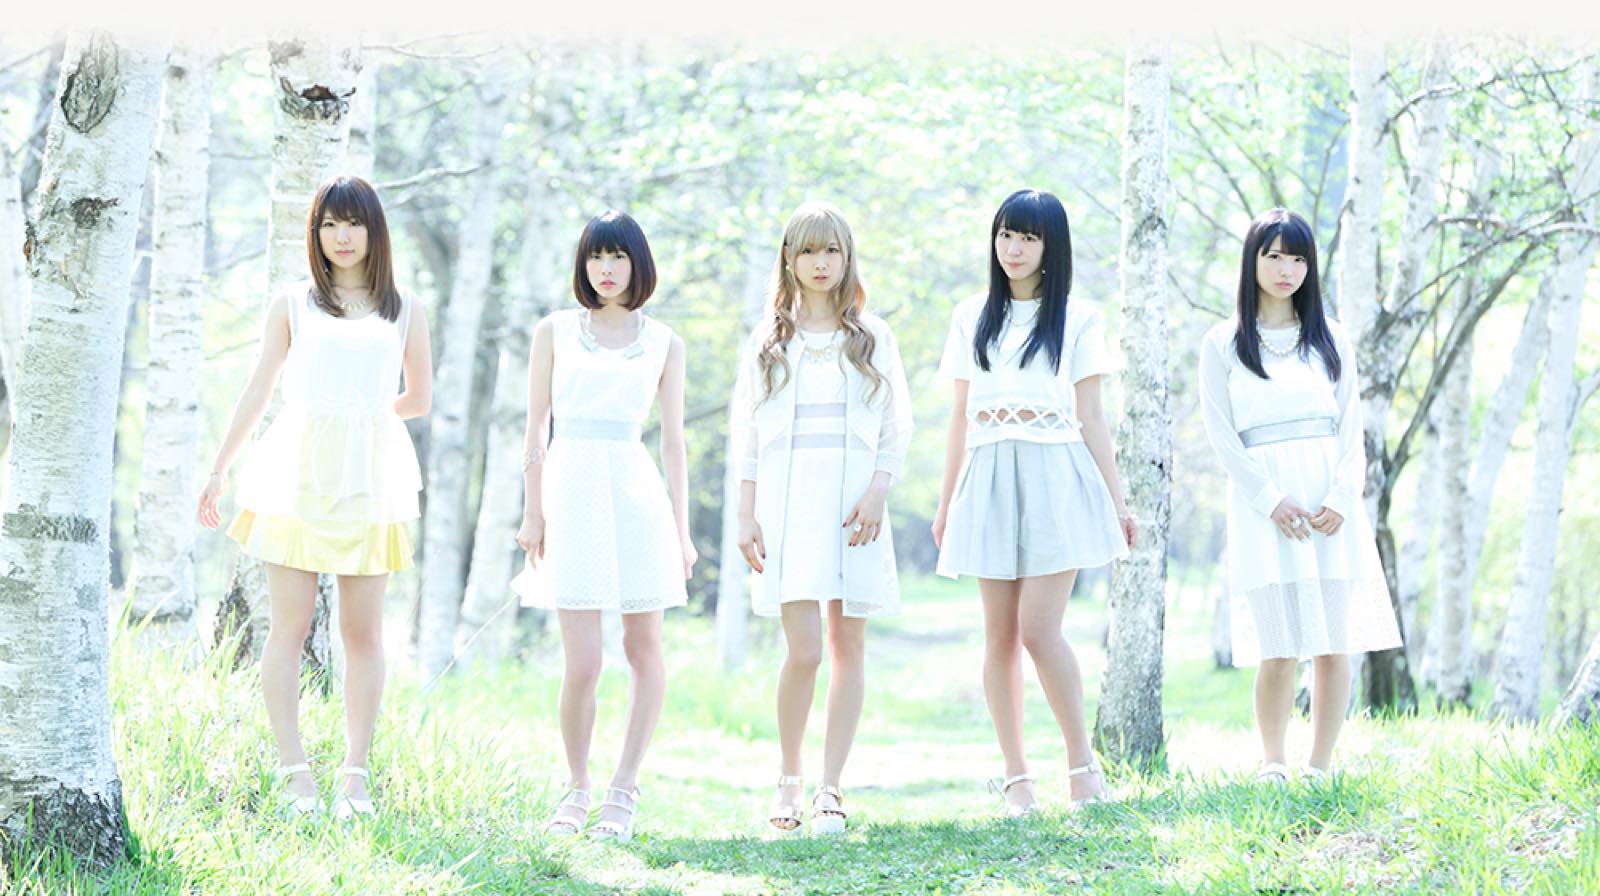 Q’ulle Gear up for Summer With the MVs for “Chain” and “ONI”!